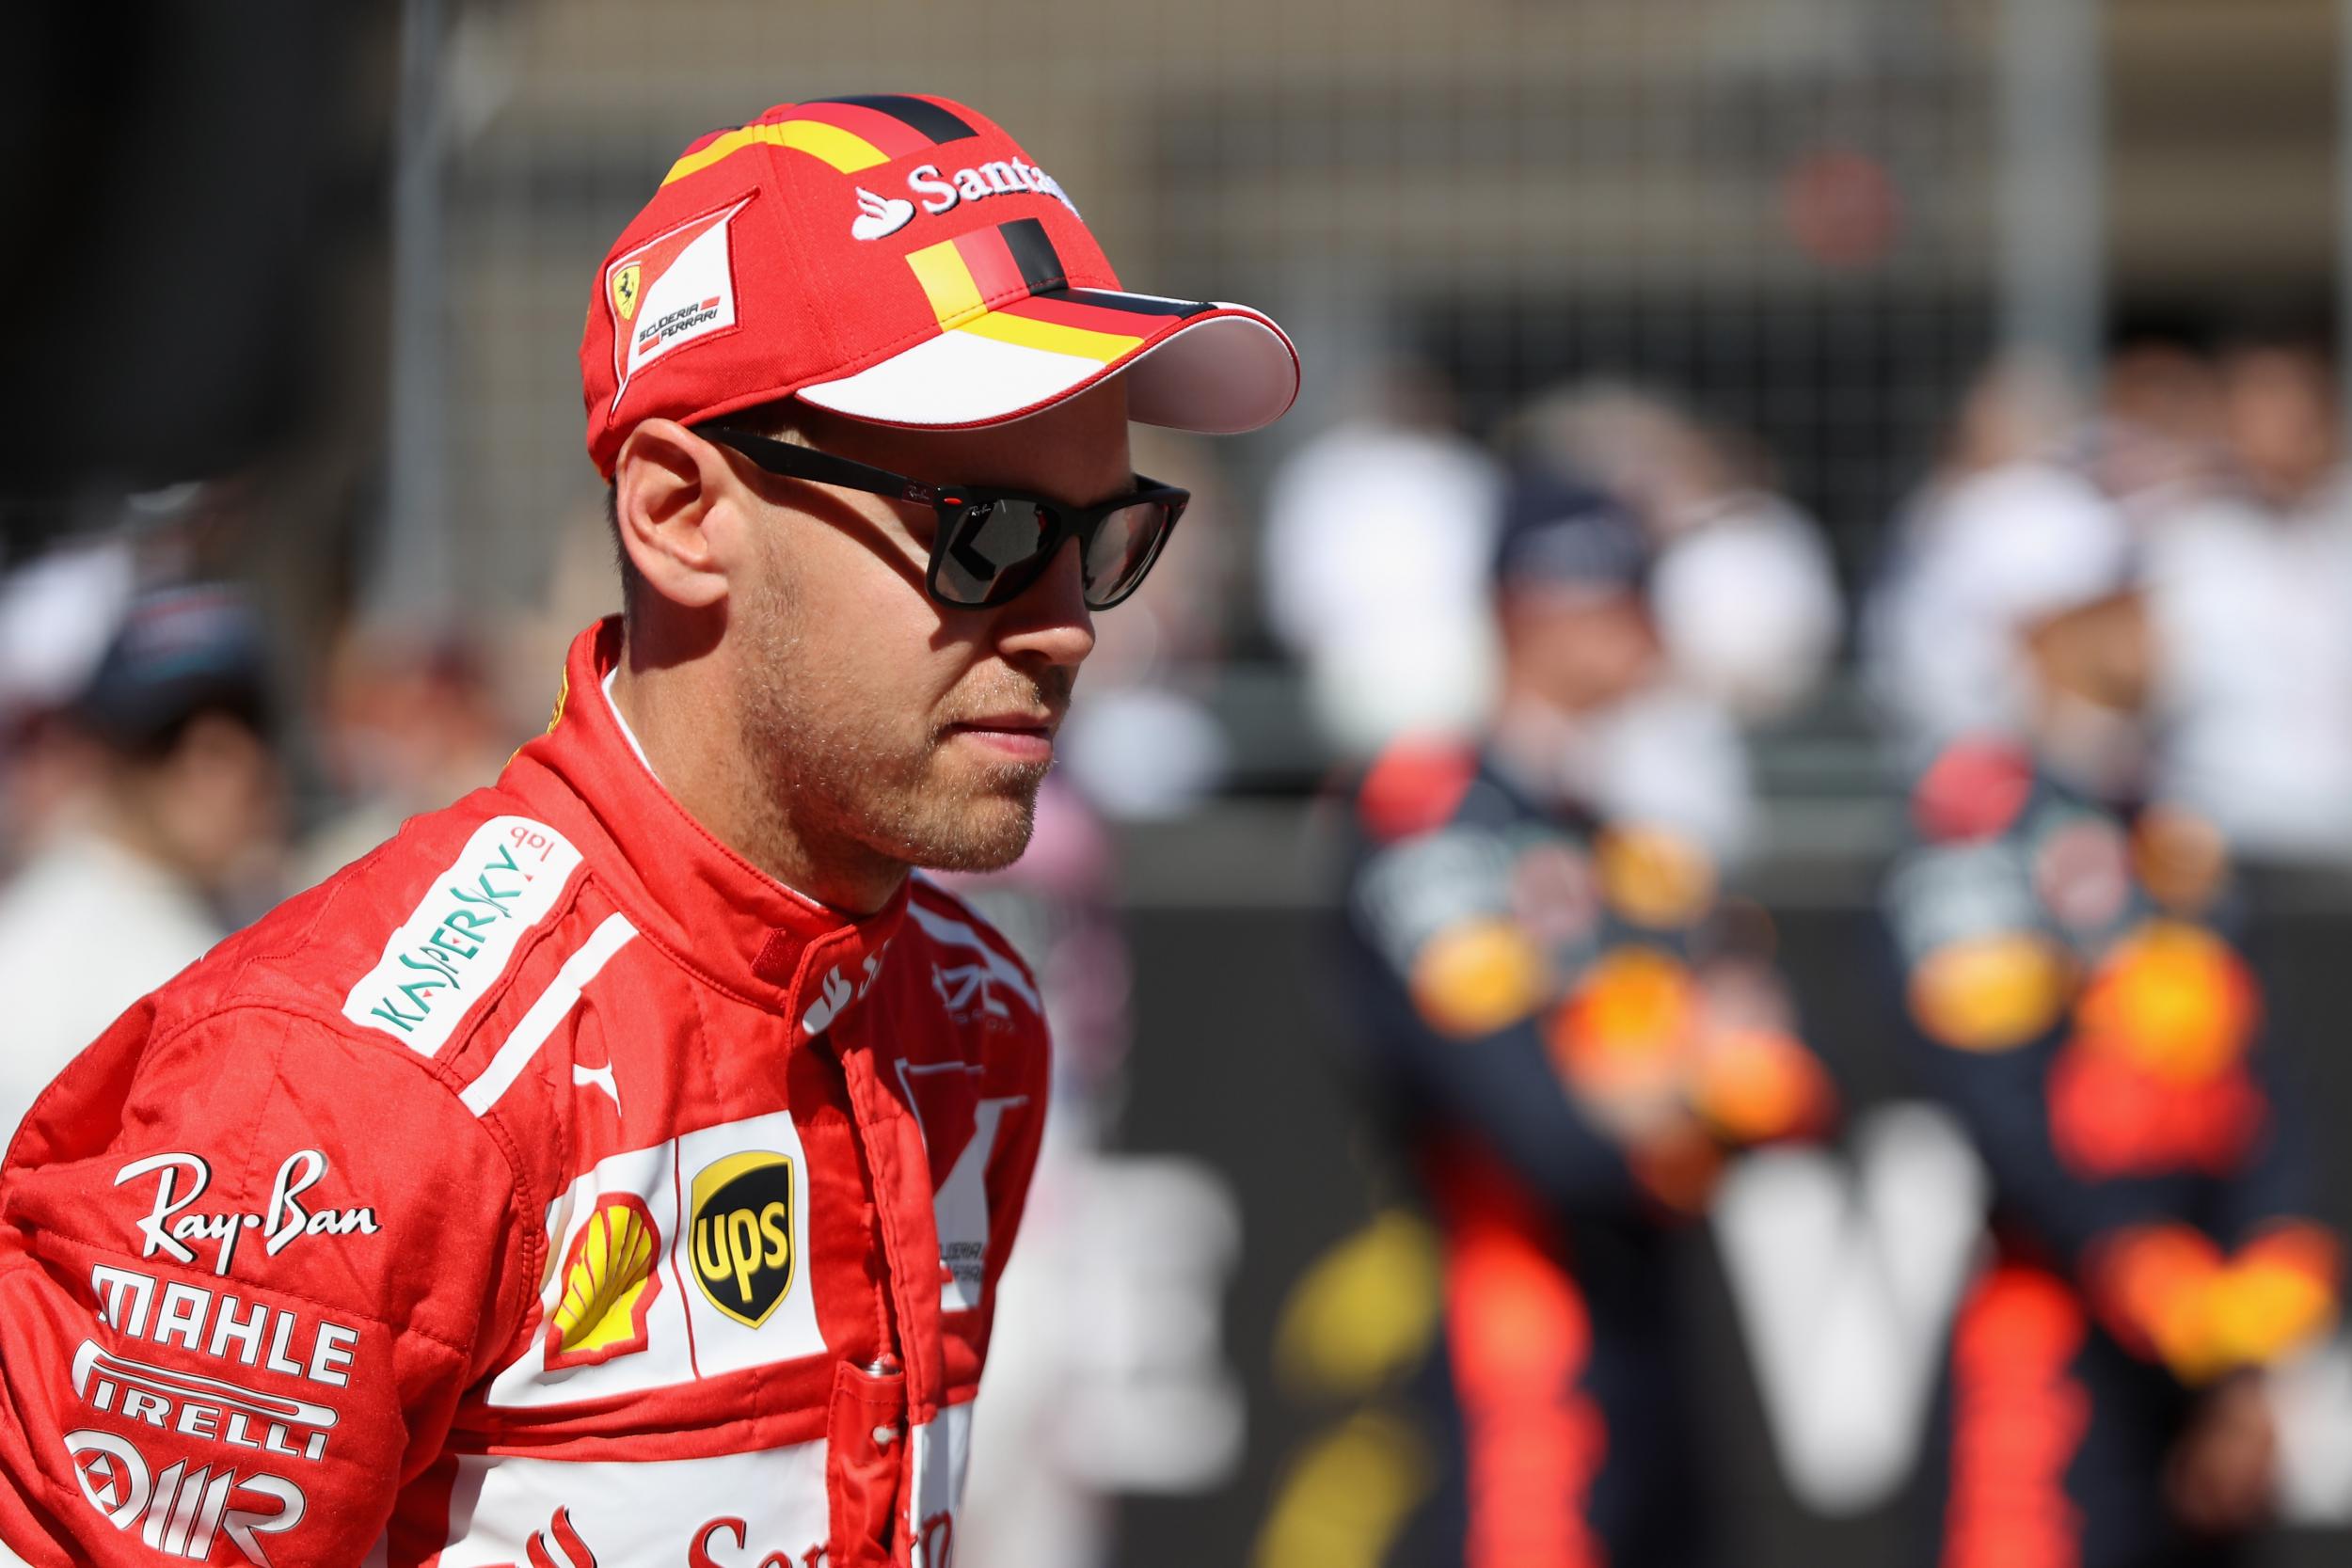 Vettel's hopes of clinching the world title are all but over